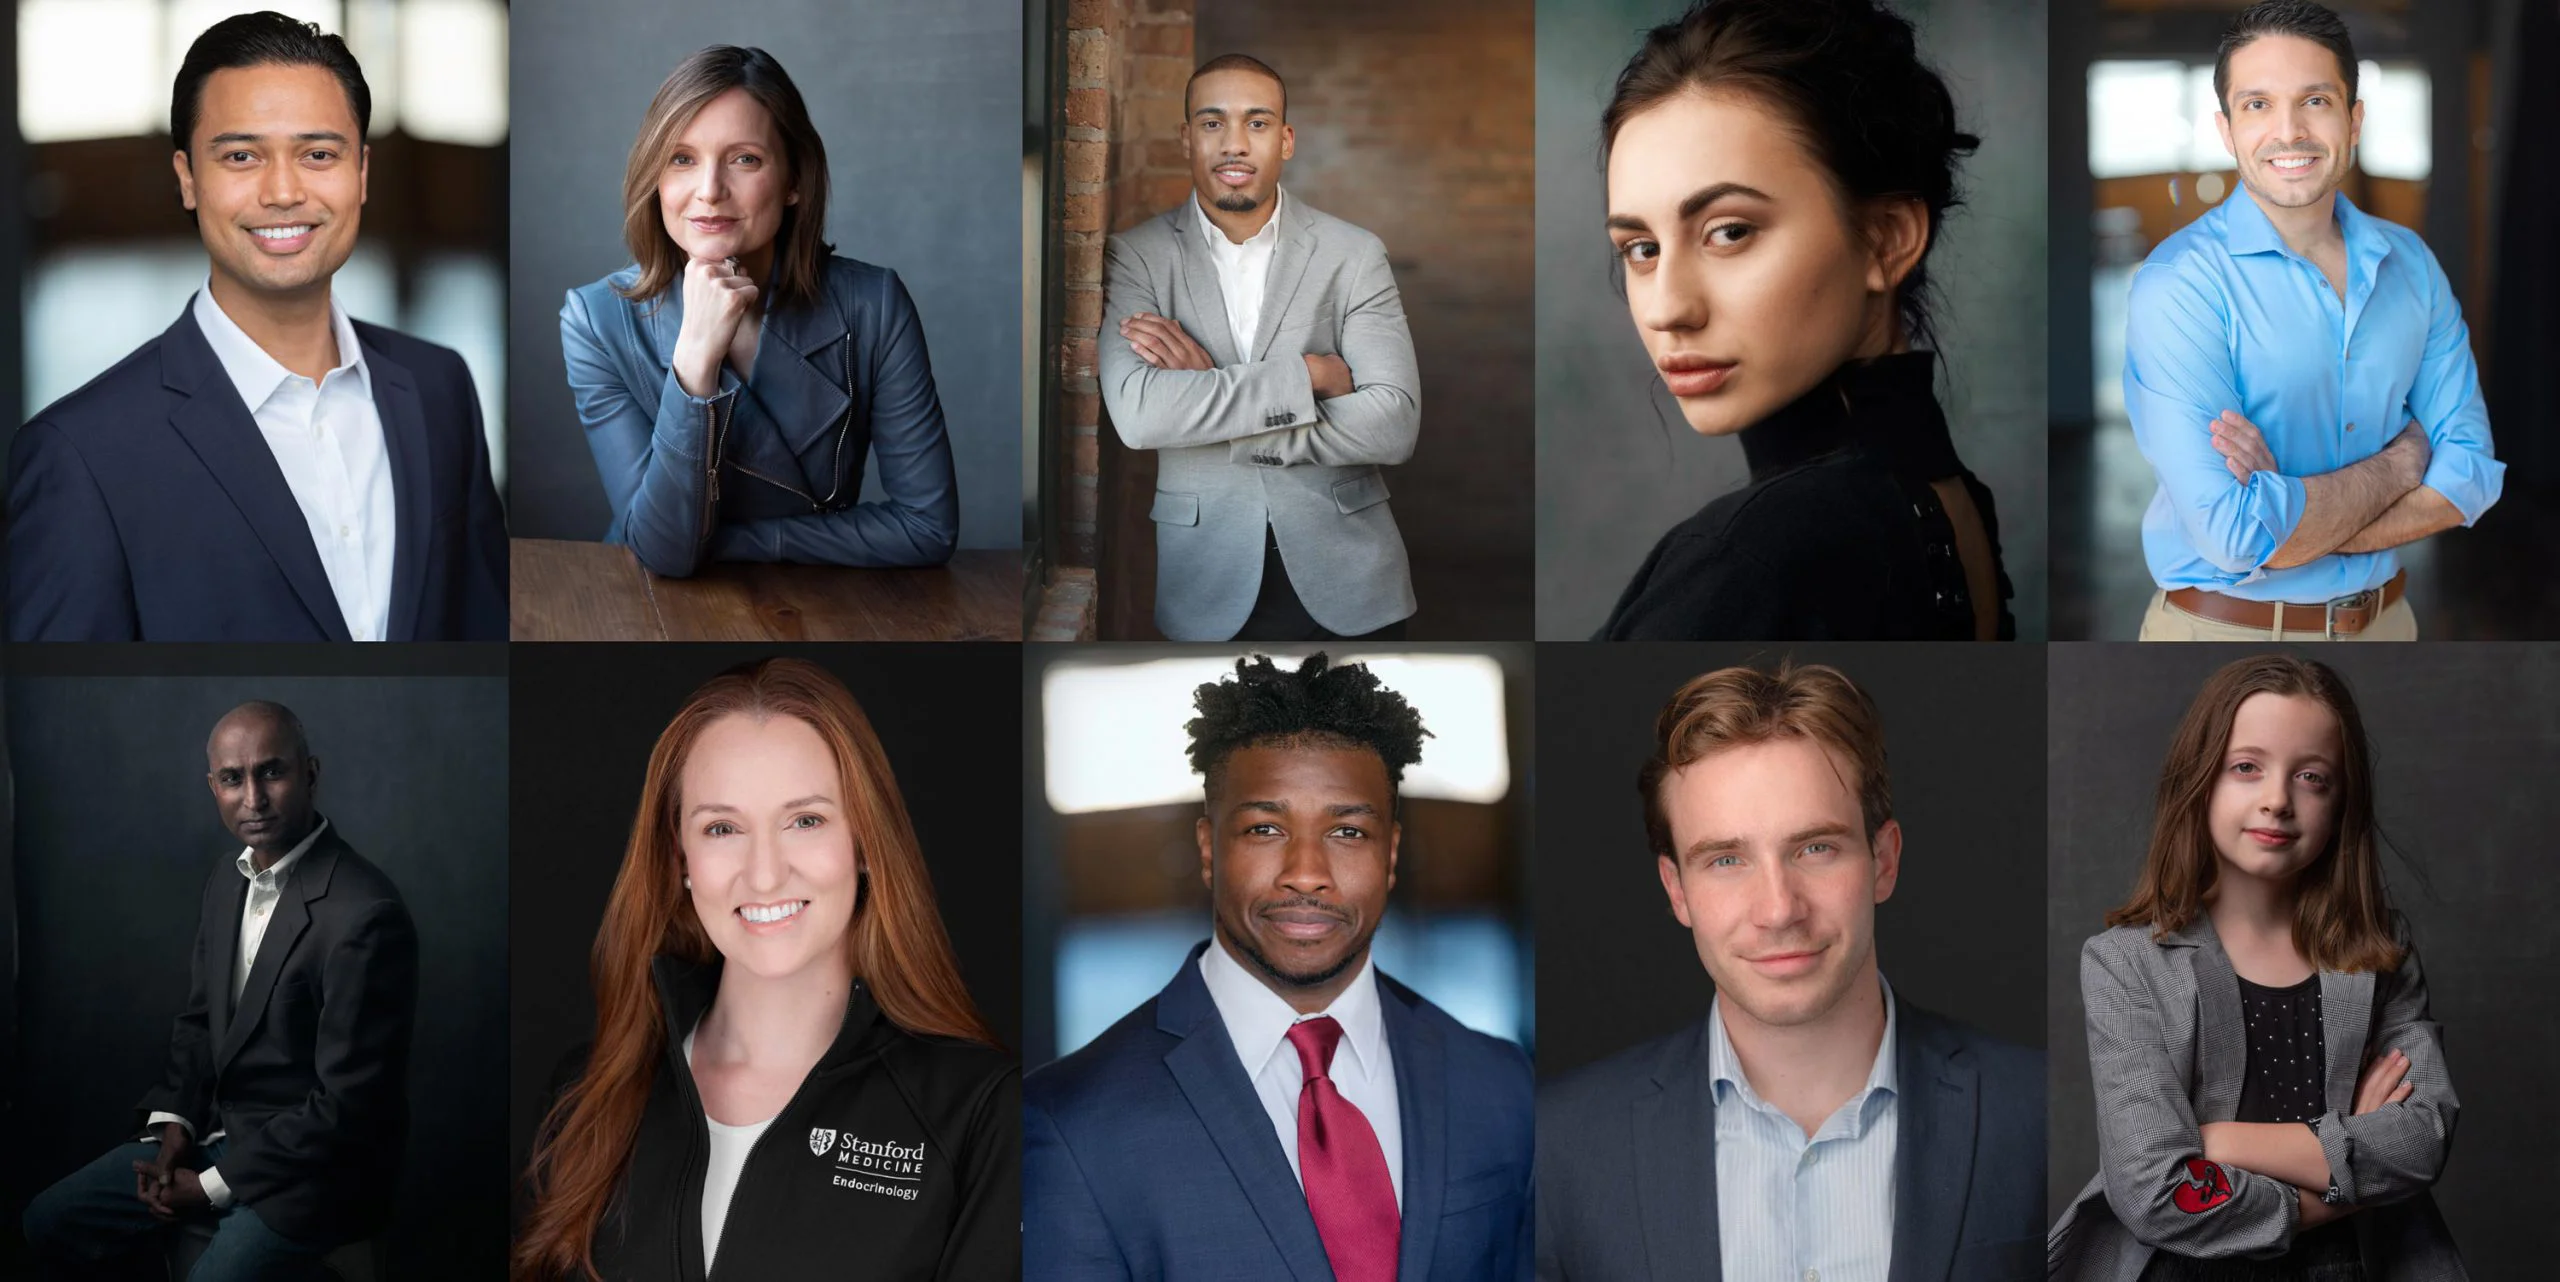 Corporate Headshot Examples in Chicago